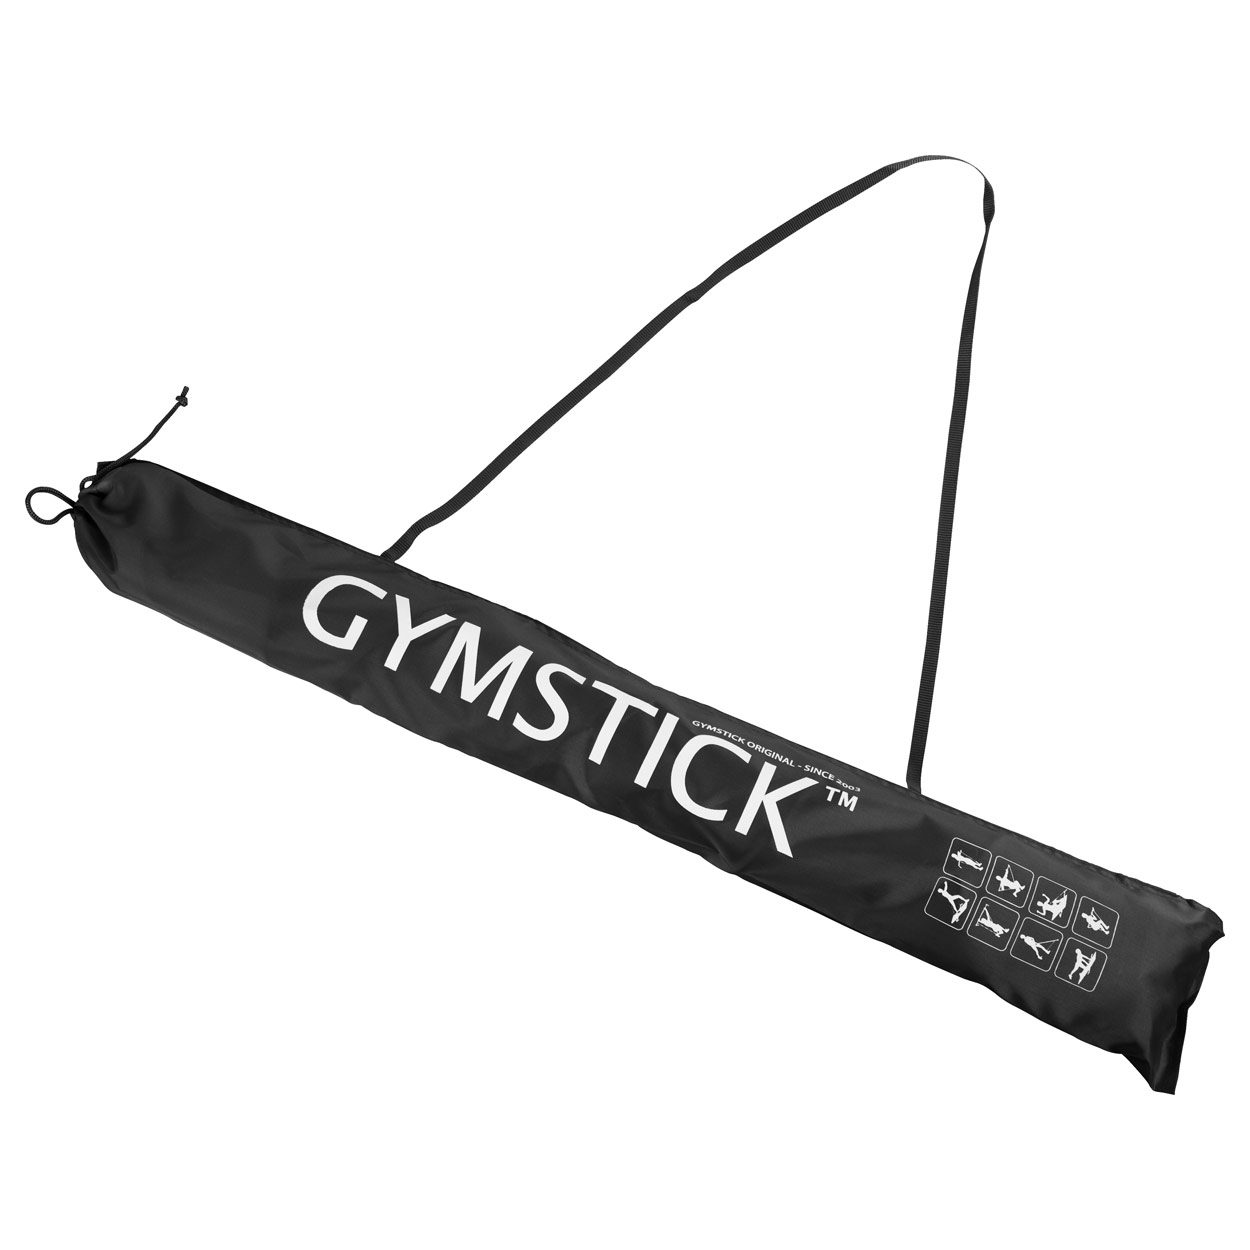 Gymstick carrying buy incl. black strong, online | Sport-Tec bag,